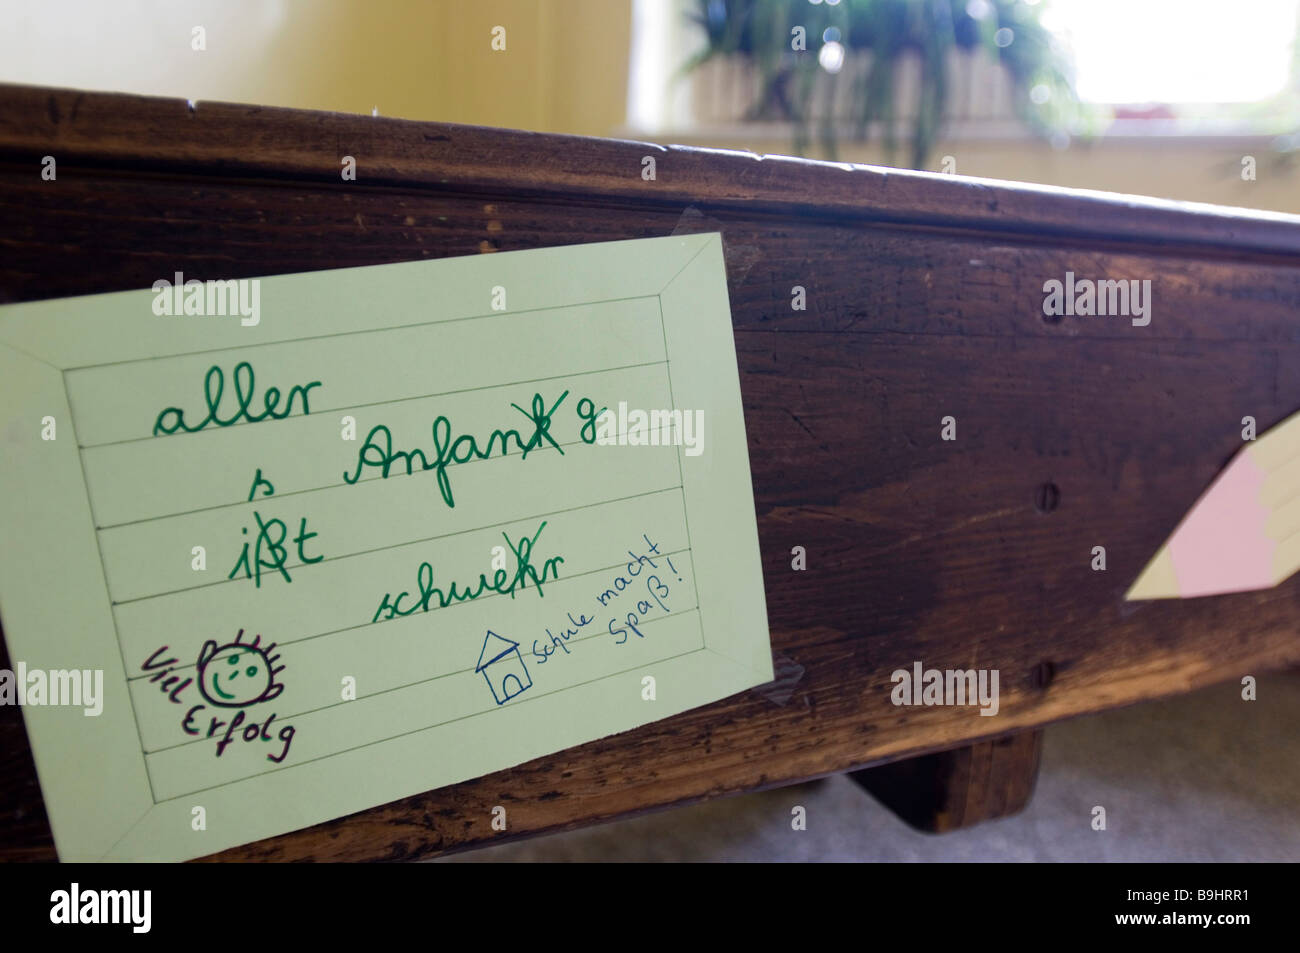 Old school desk with an index card and text with spelling mistakes Stock Photo